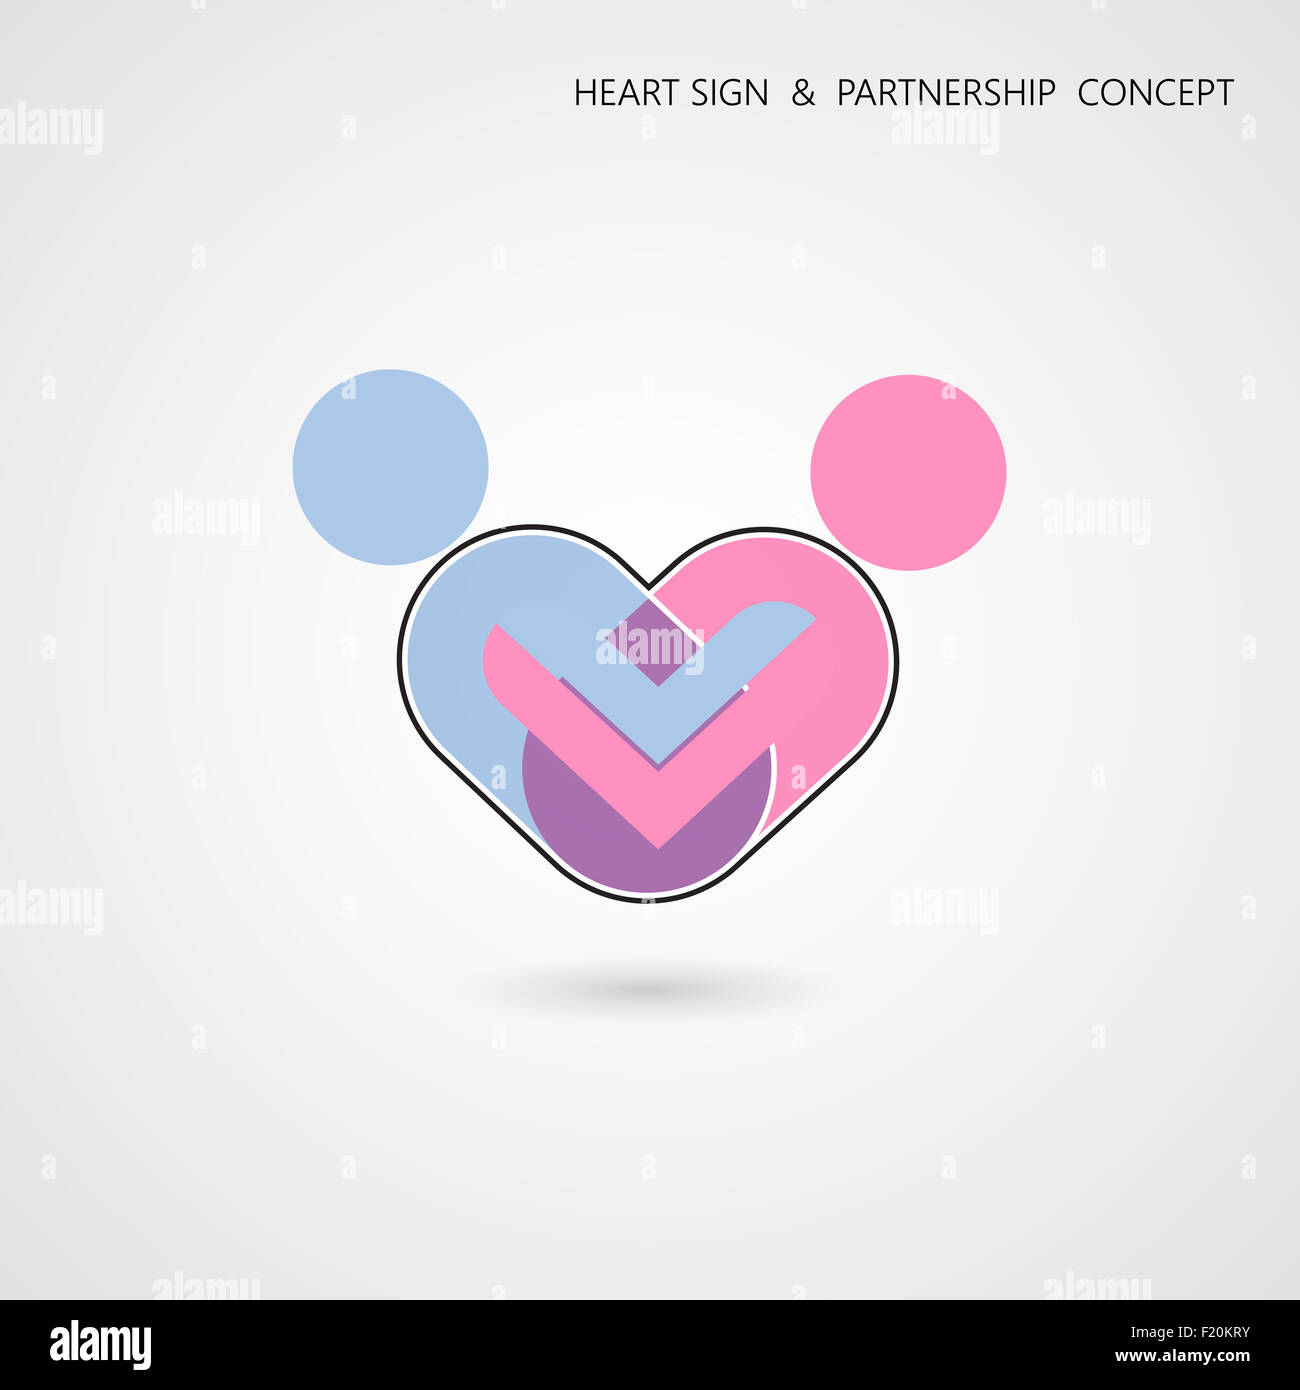 Creative heart shape and human symbol with business concept. Teamwork sign. Partnership and cooperation concept Stock Photo